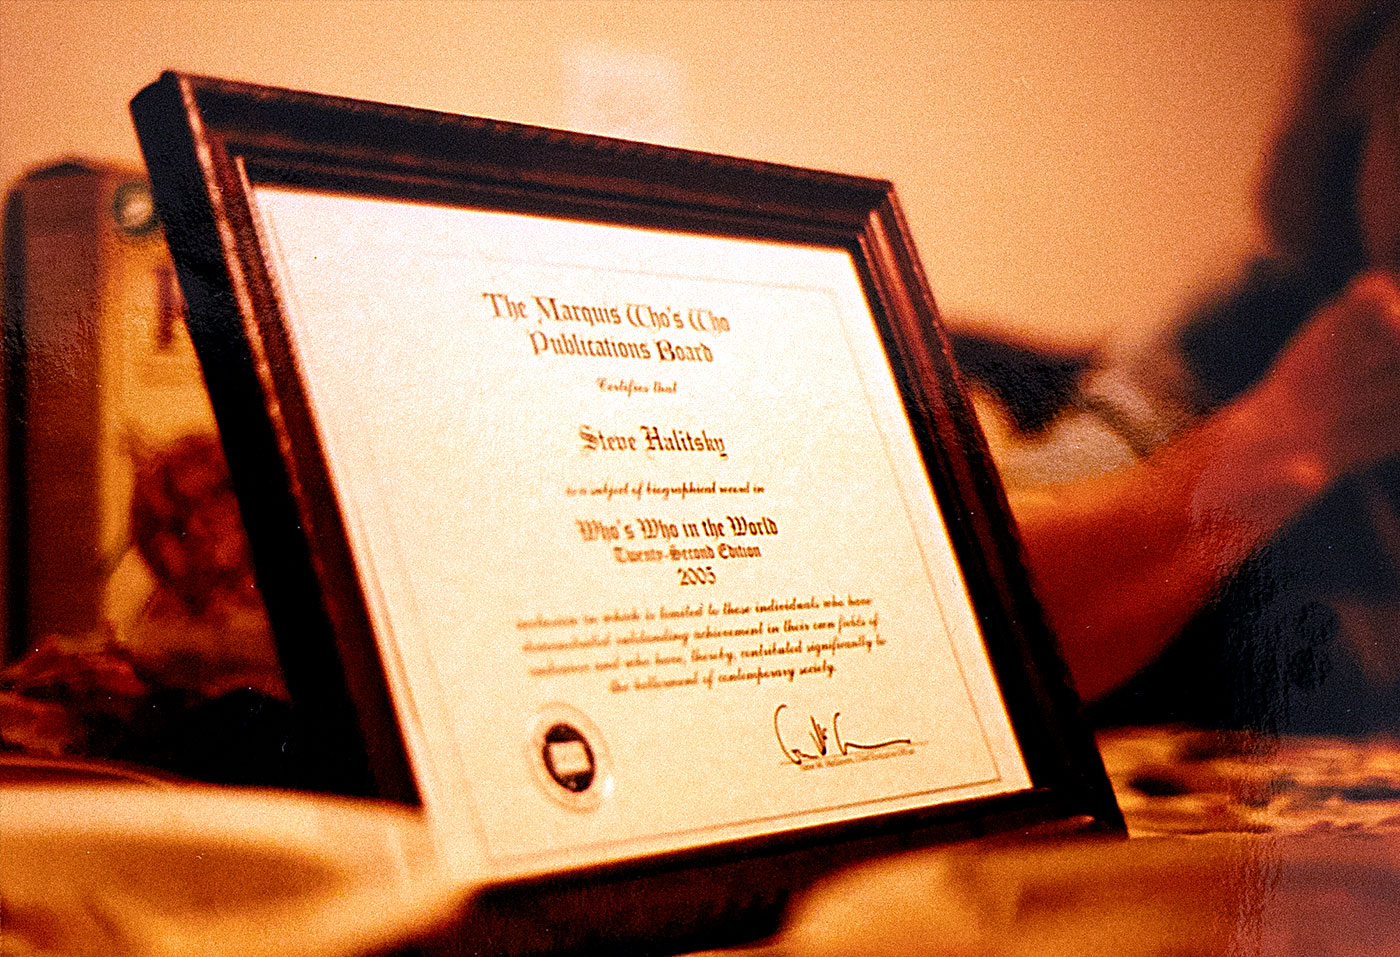 Steve Halitsky's Marquis Who's Who in the World Certificate (2005)